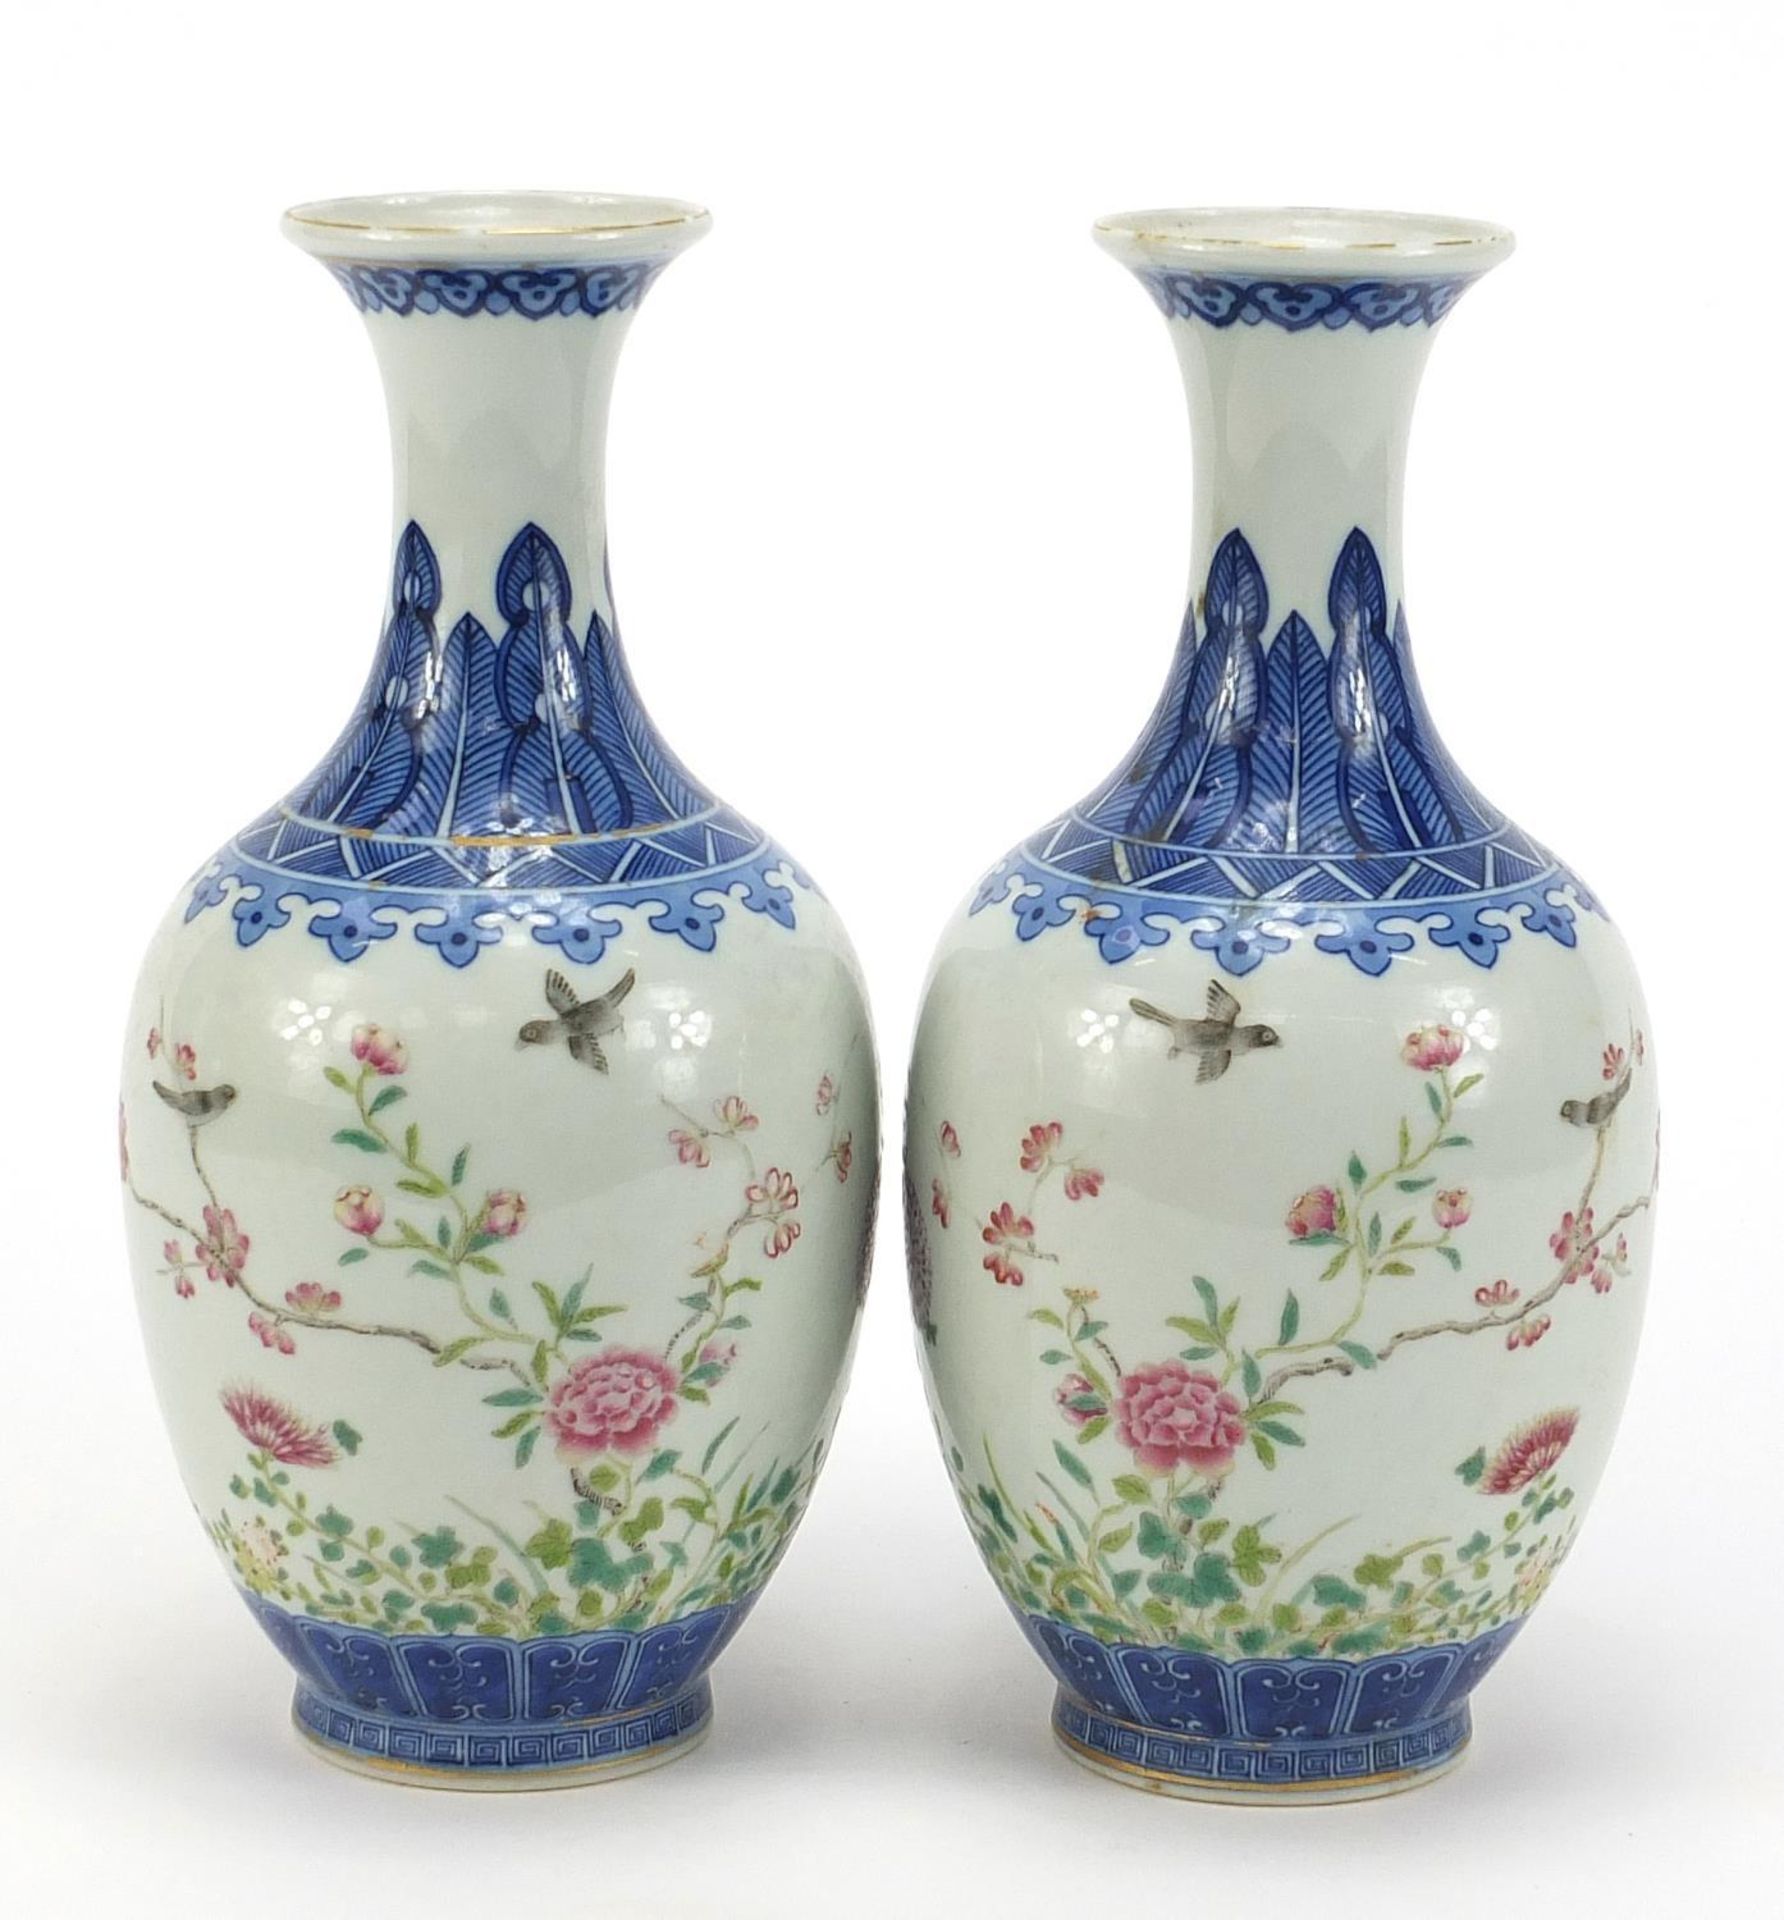 Pair of Chinese blue and white porcelain vases hand painted in the famille rose palette with birds